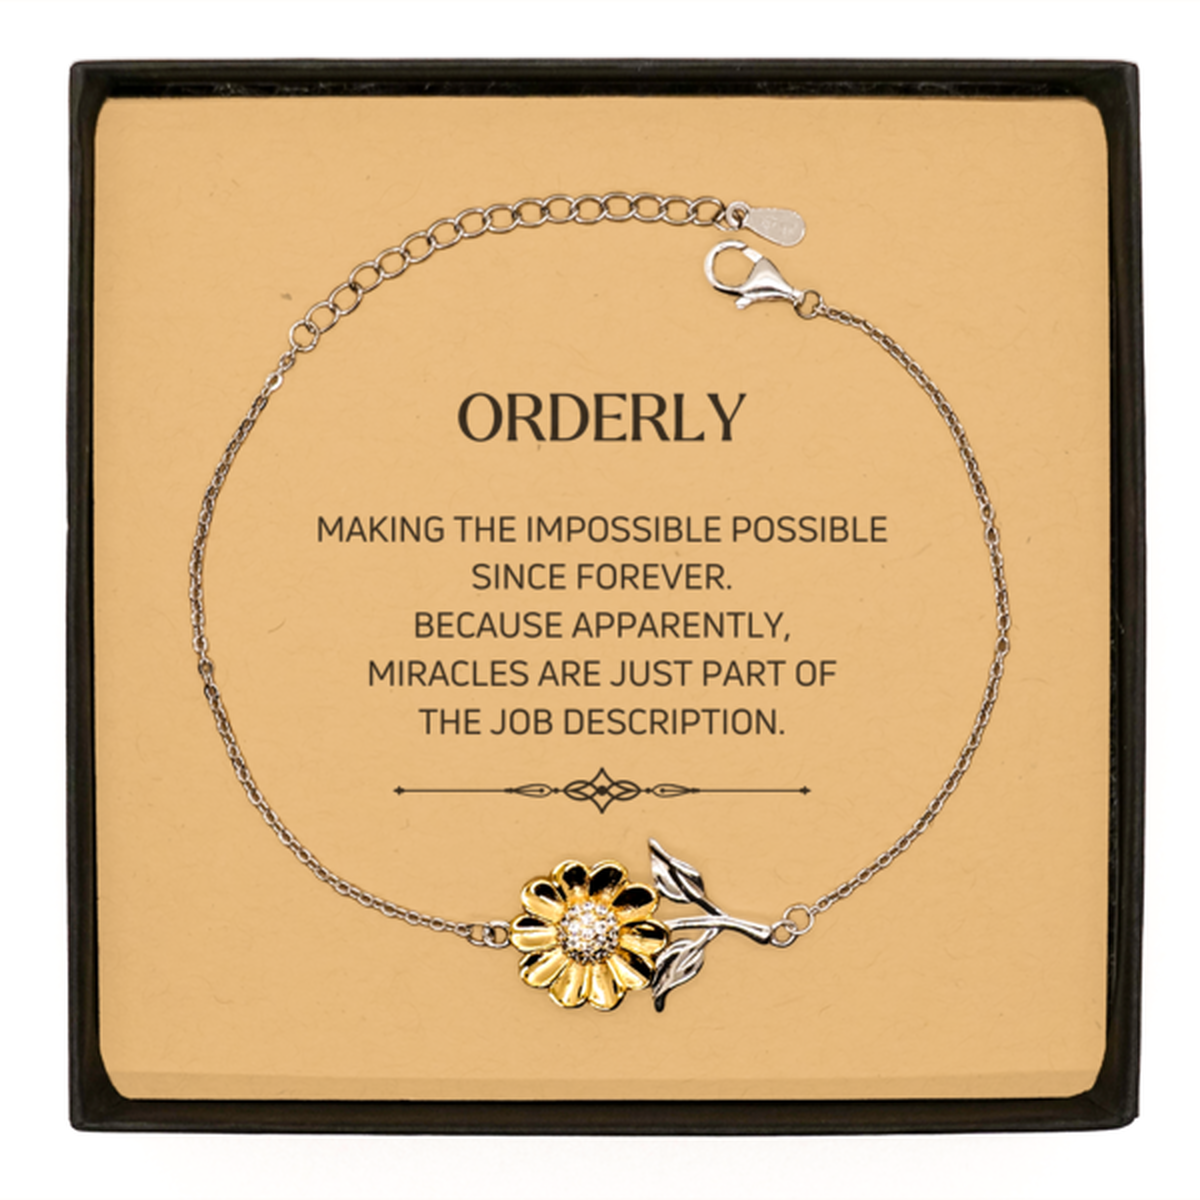 Funny Orderly Gifts, Miracles are just part of the job description, Inspirational Birthday Sunflower Bracelet For Orderly, Men, Women, Coworkers, Friends, Boss